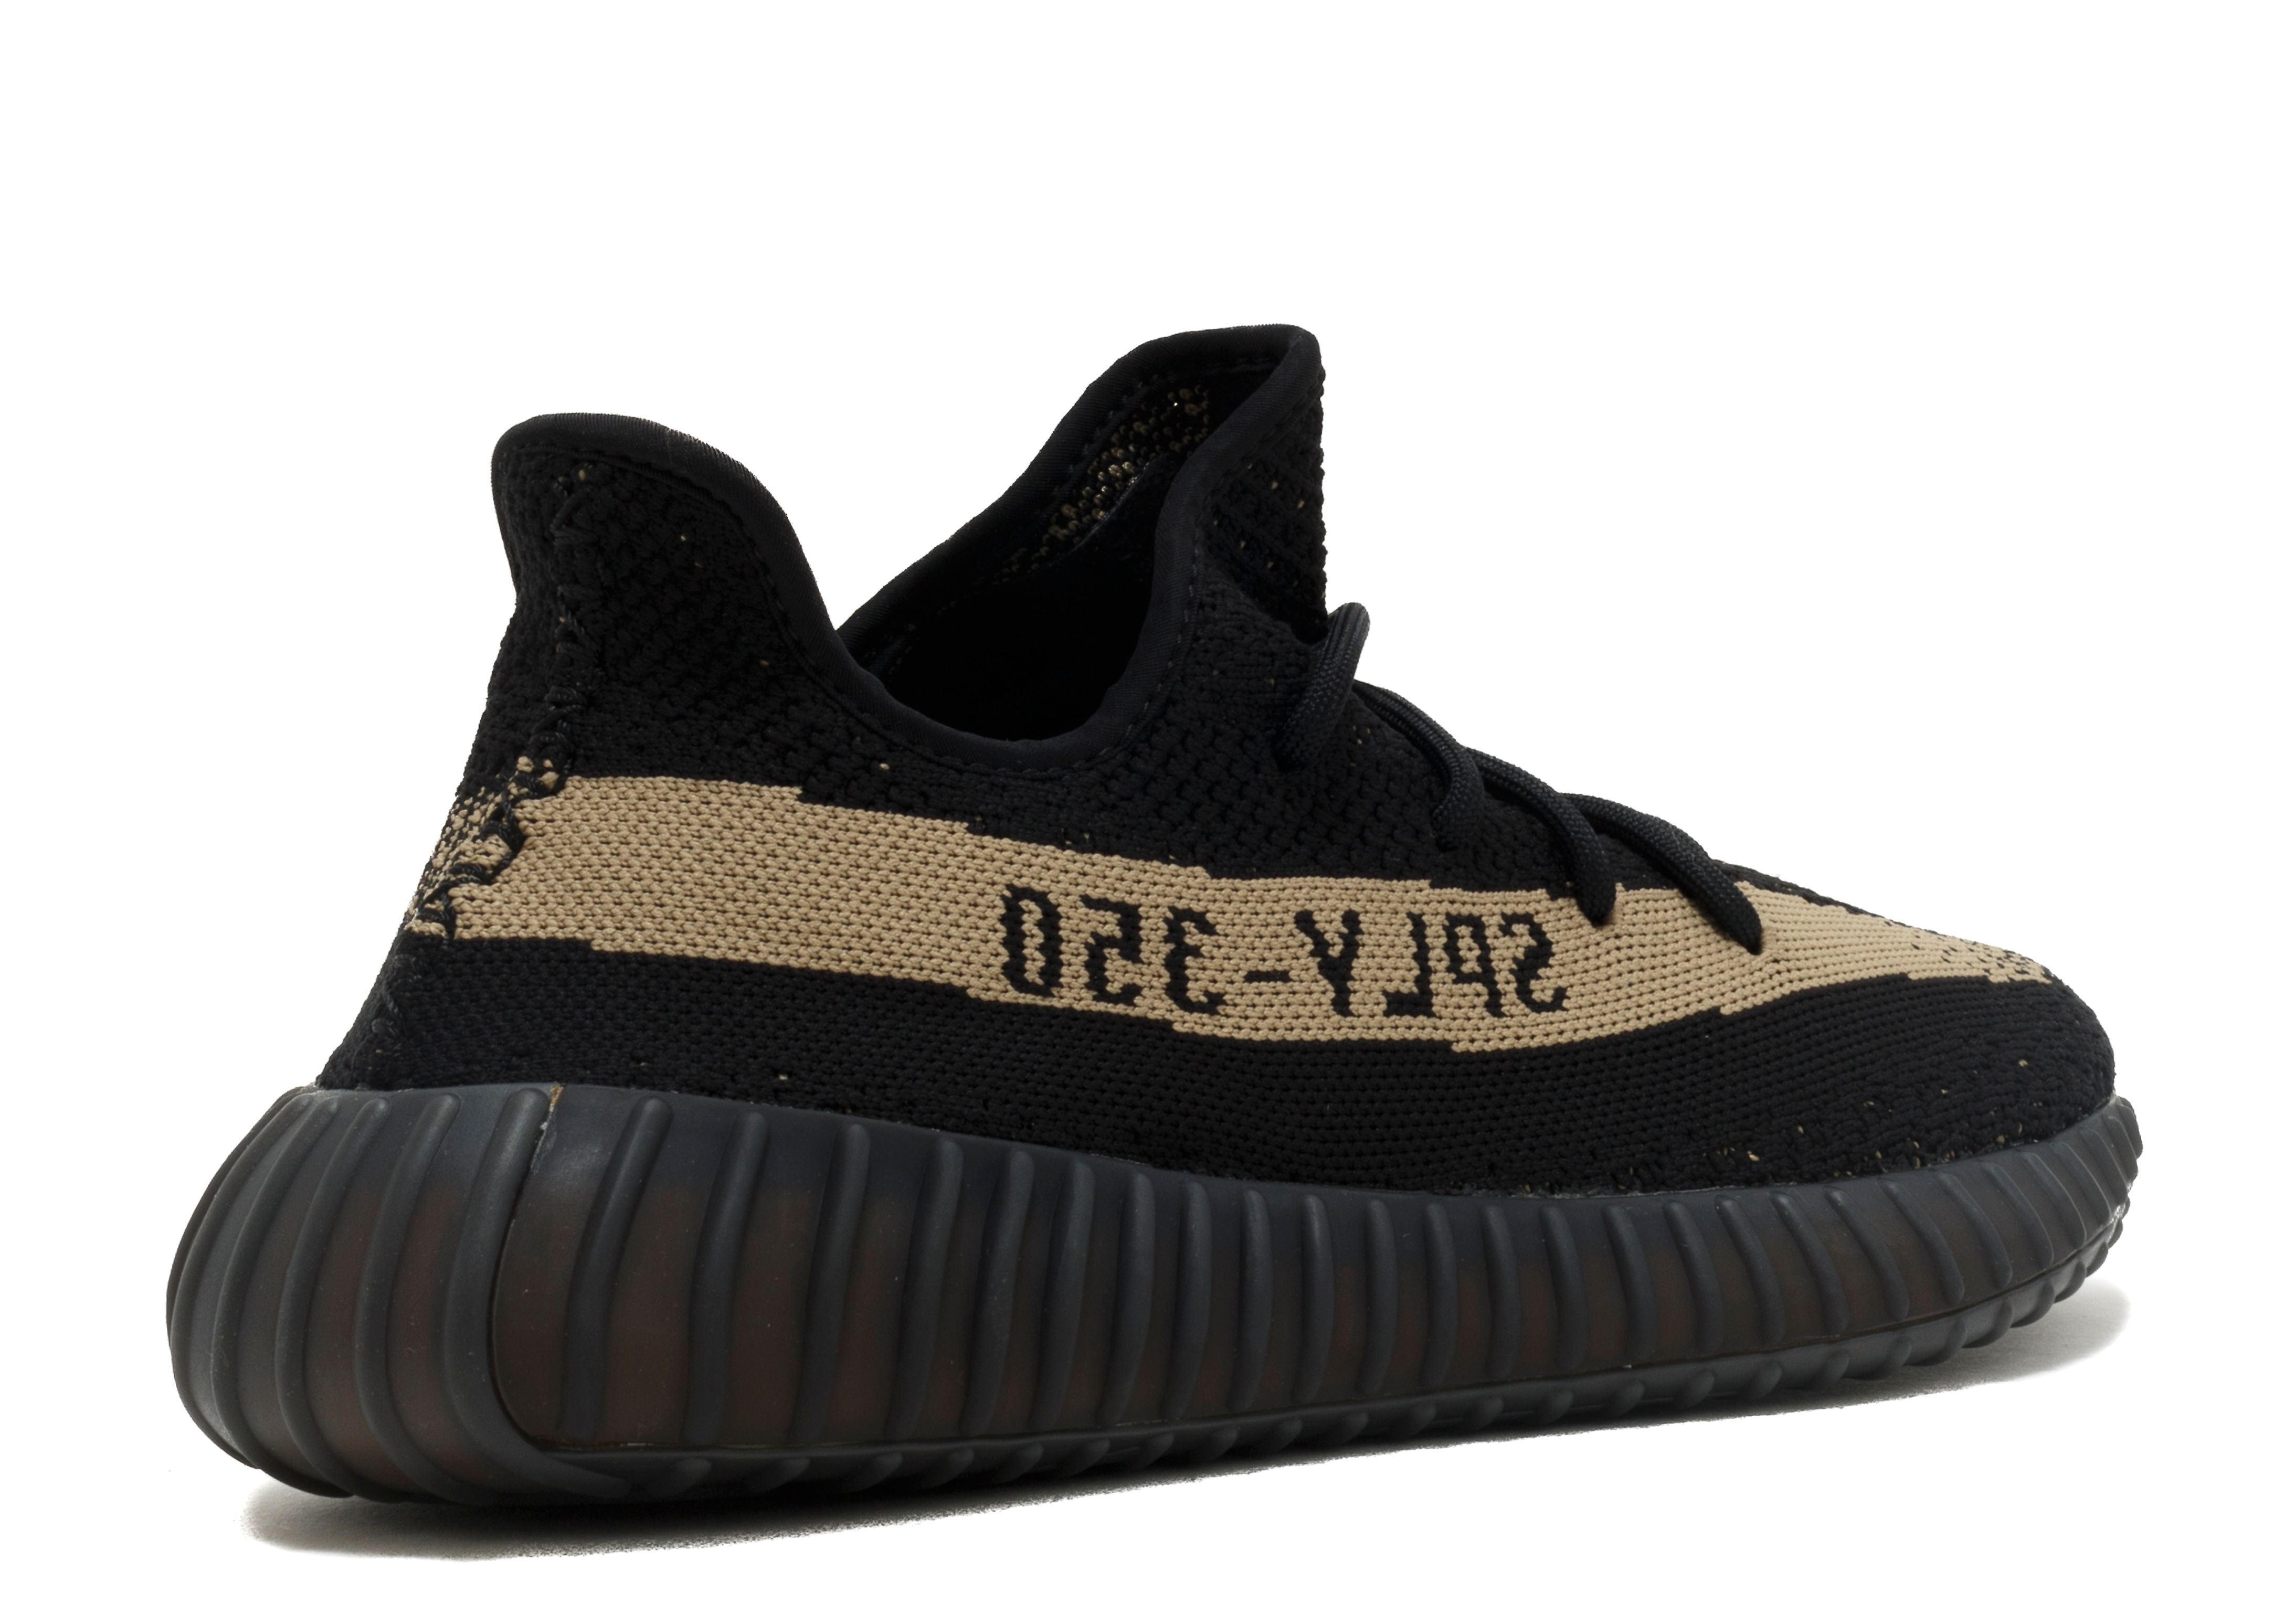 yeezy boost 350 army green